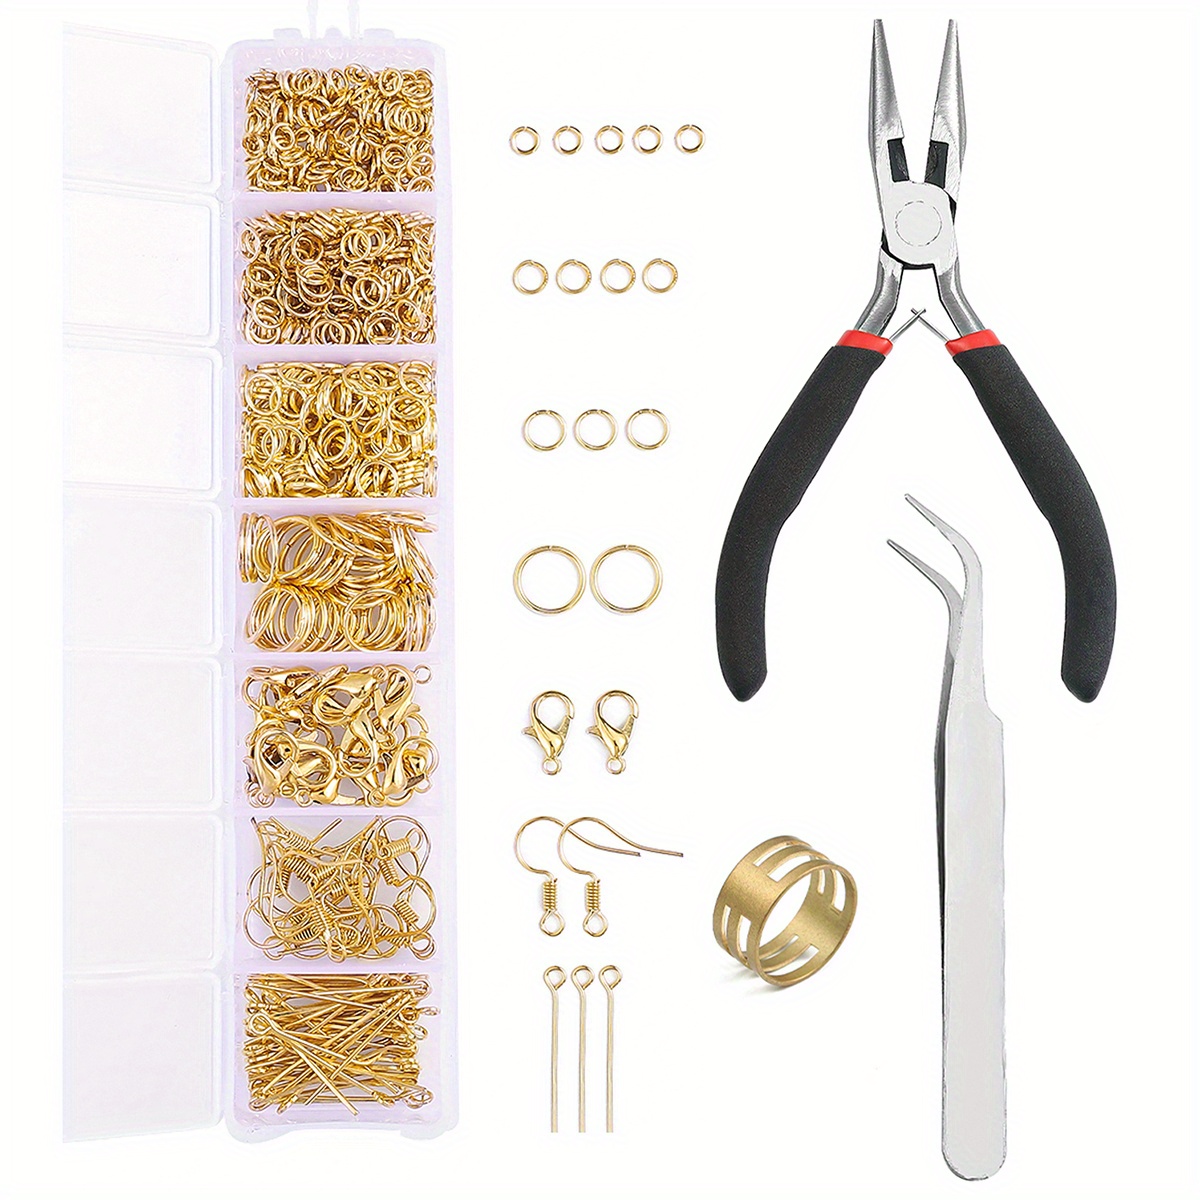 EuTengHao Jewelry Making Supplies Kit Jewelry Repair Tool Set with Jewelry  Pliers Beading Wires Open Jump Ring Lobster Clasps Necklace Cord Ribbon  Ends Jewelry Findings Making for Jewelry DIY Supplies